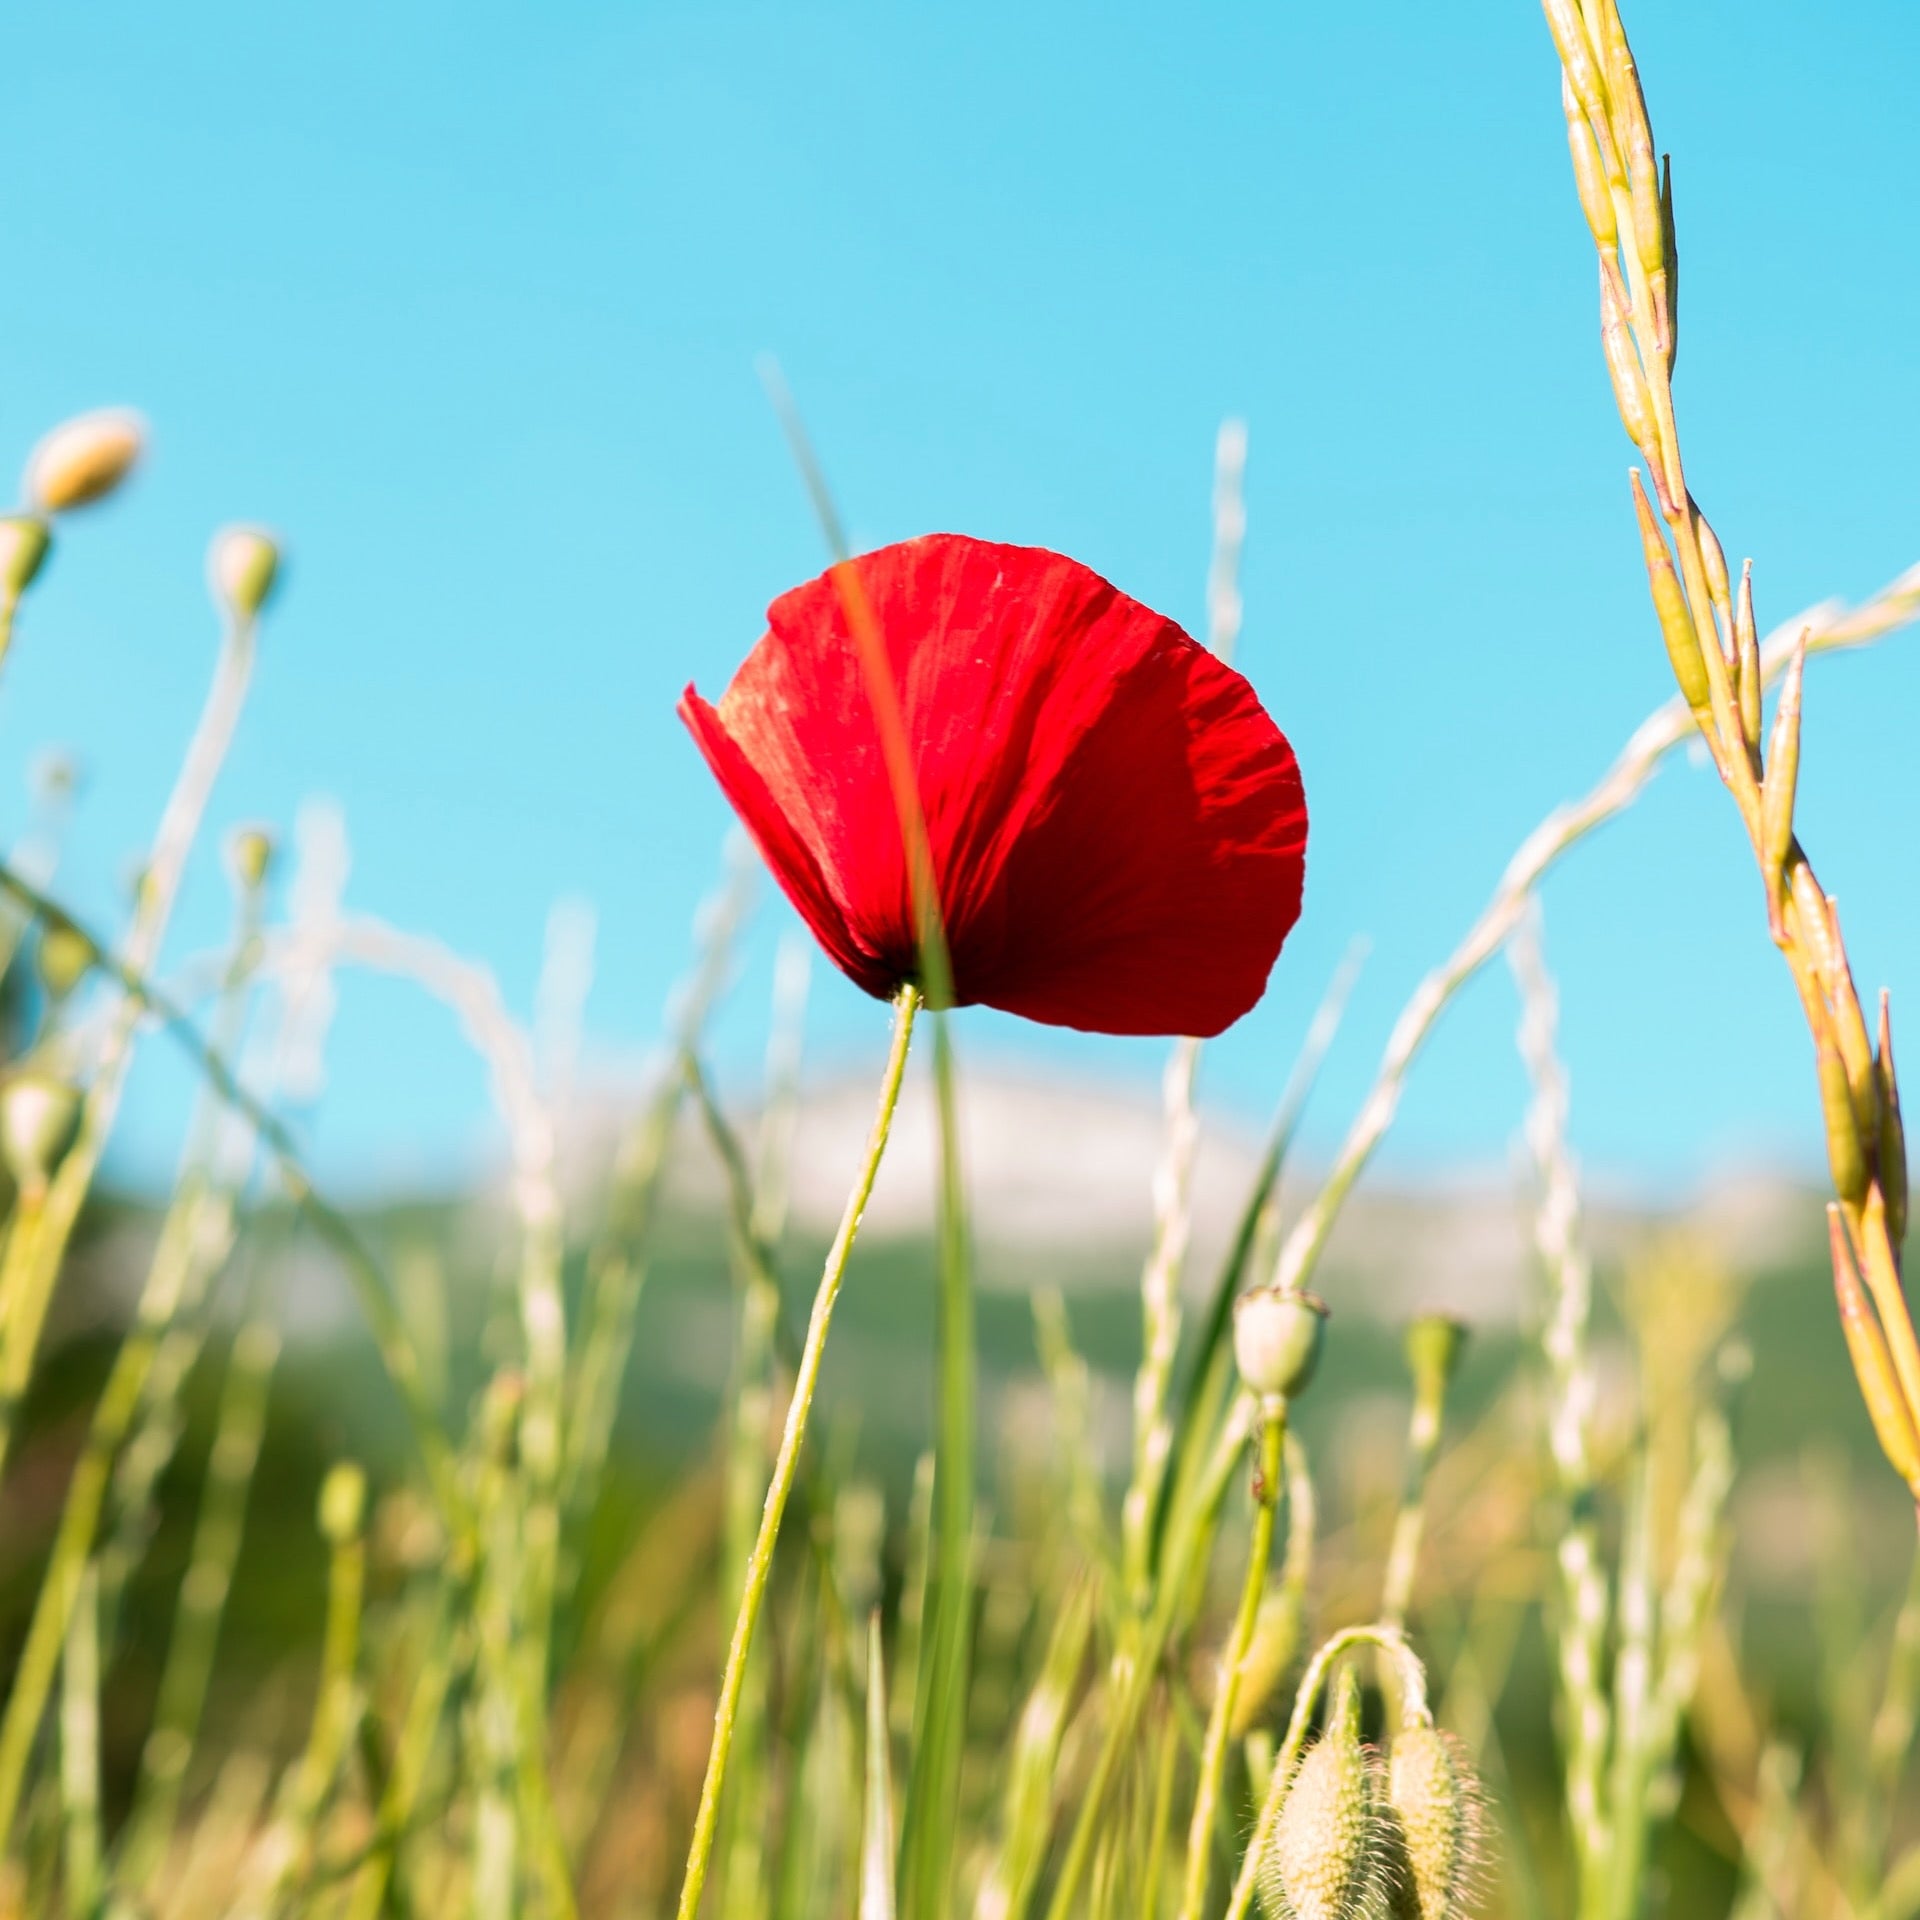 Why do we wear Poppies on ANZAC Day?